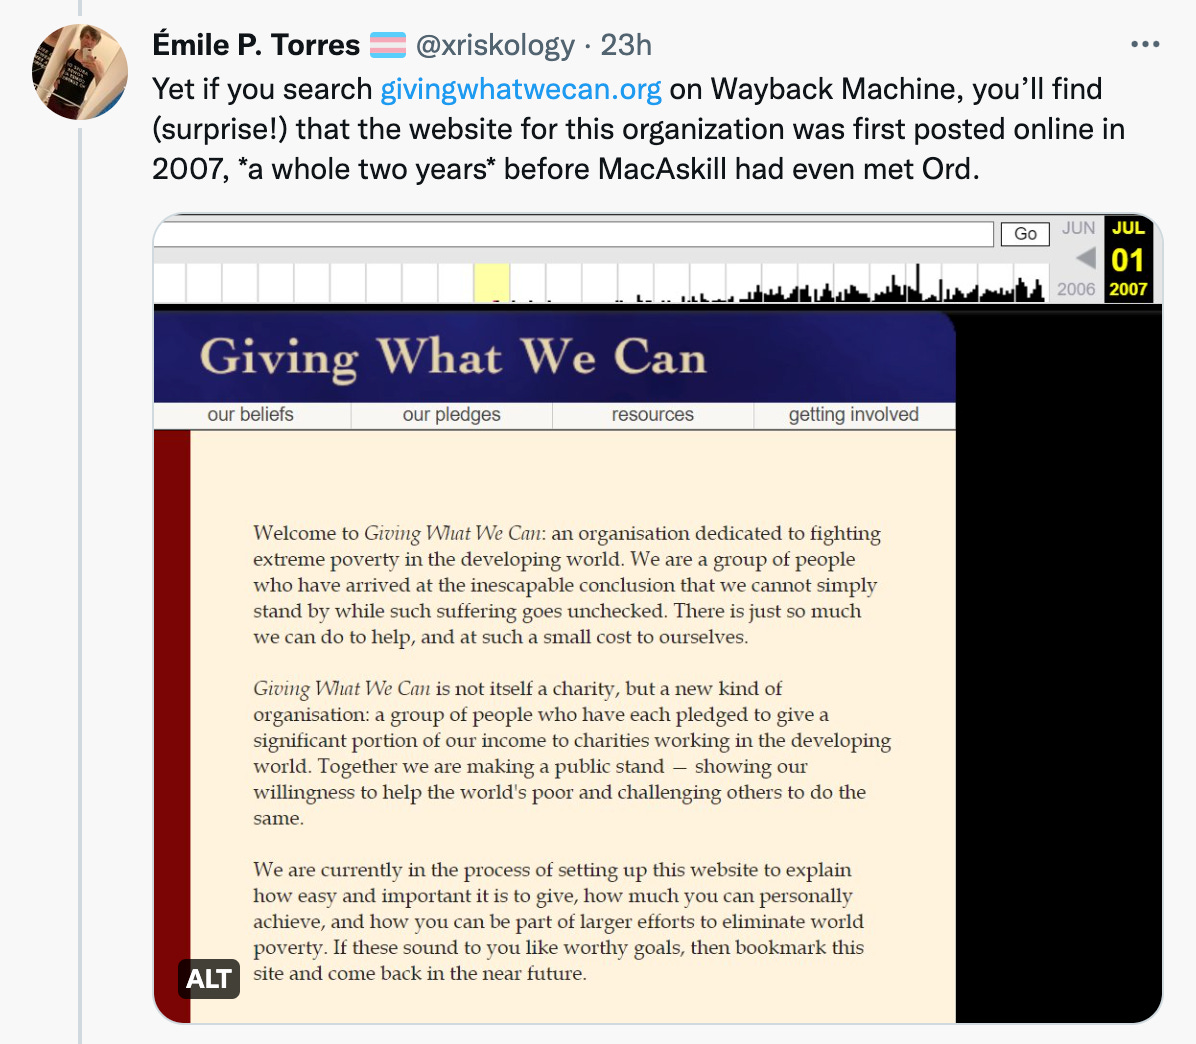 Émile P. Torres: Yet if you search givingwhatwecan.org on Wayback Machine, you’ll find (surprise!) that the website for this organization was first posted online in 2007, a whole two years before MacAskill had even met Ord.